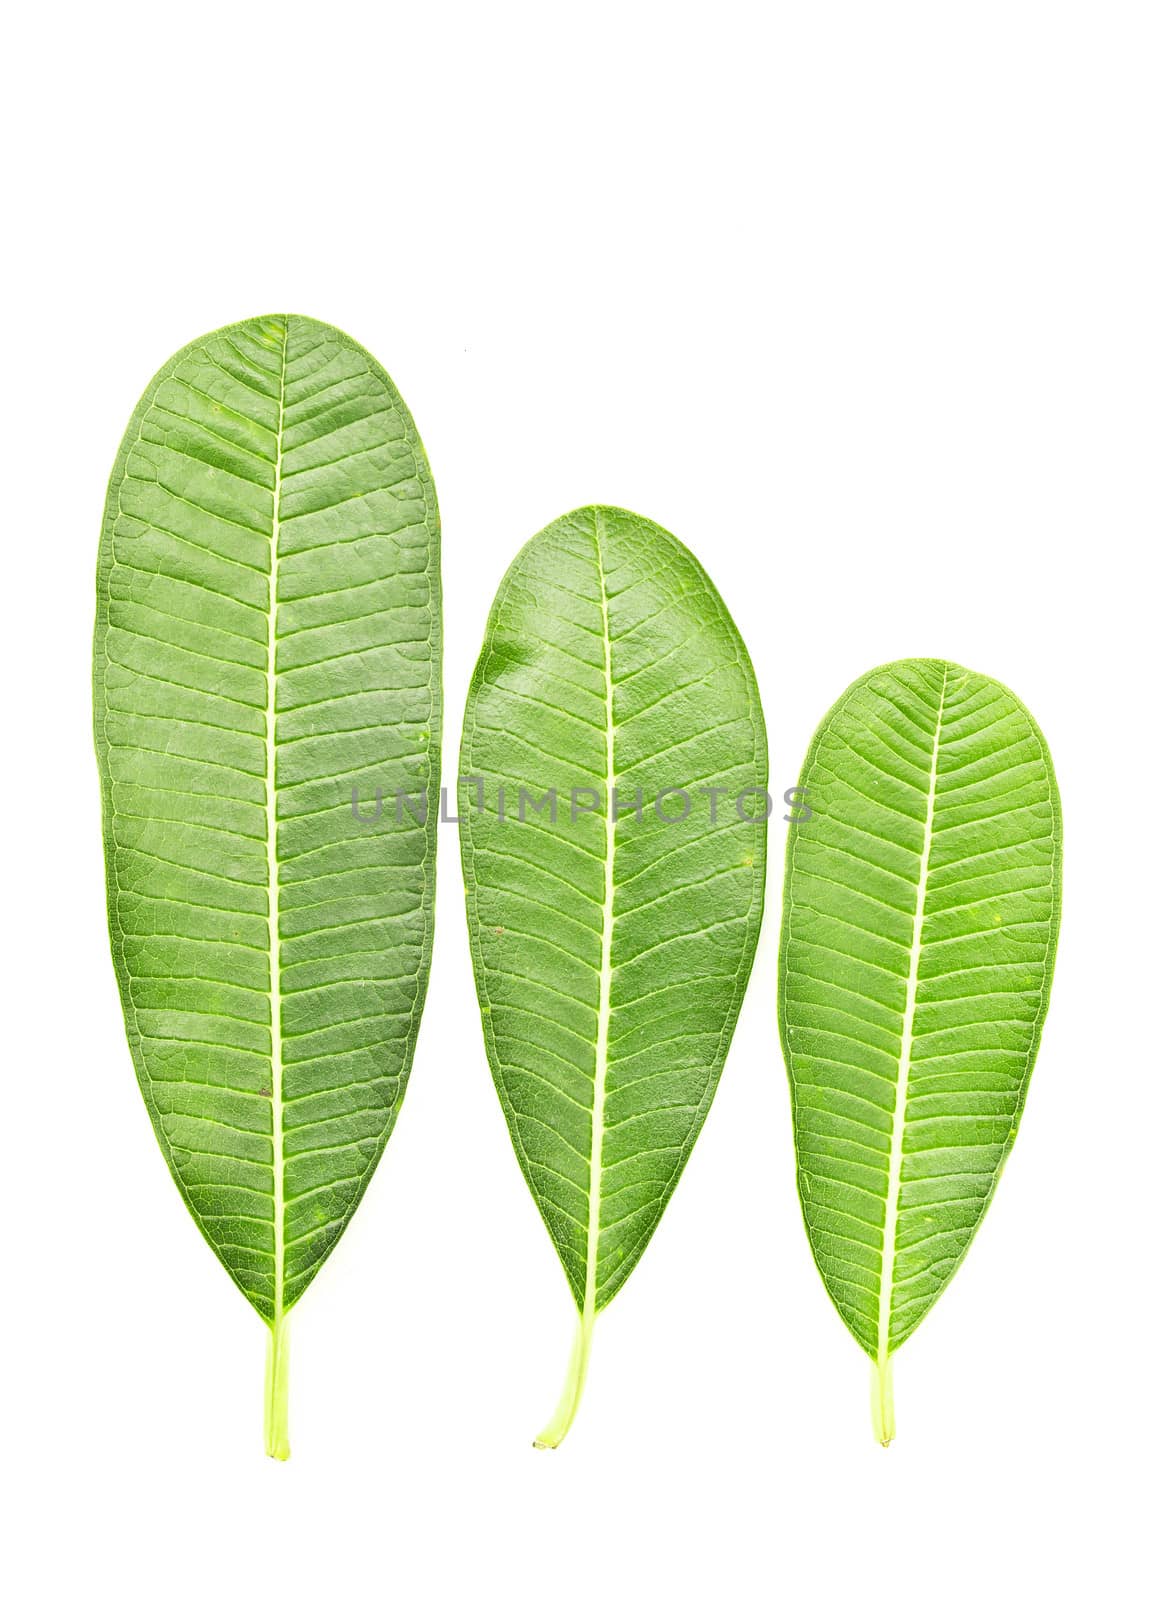 Tropical leaf isolated on white by den_rutchapong